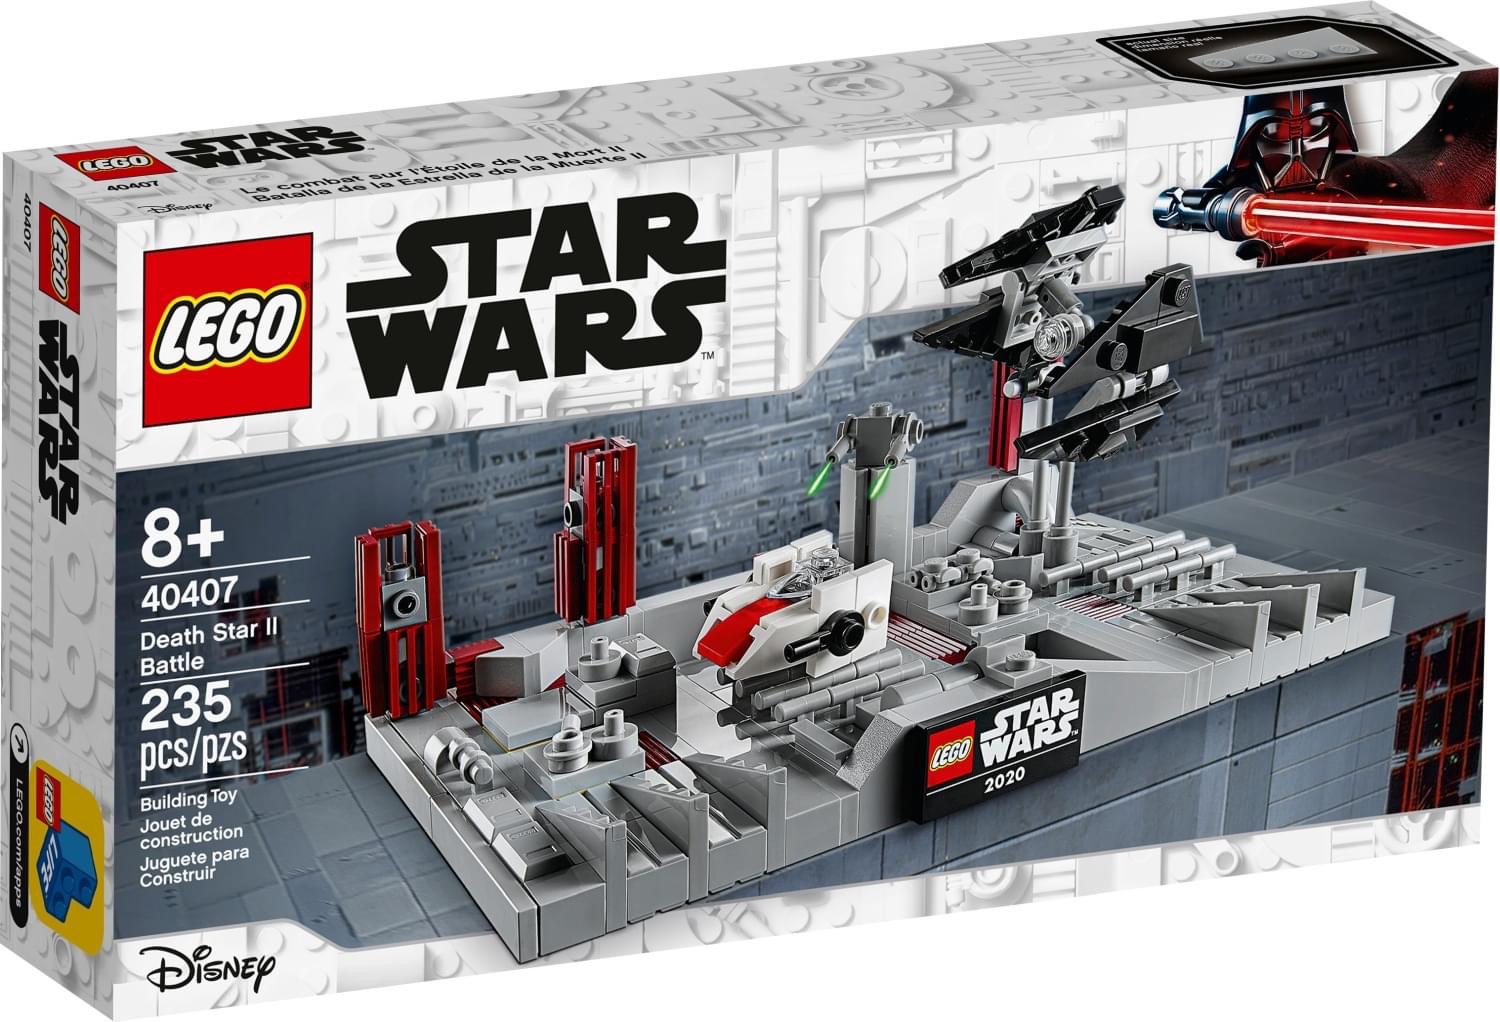 Brick Built Blogs Lego Star Wars May 4th 2020 Gift With Purchased Revealed